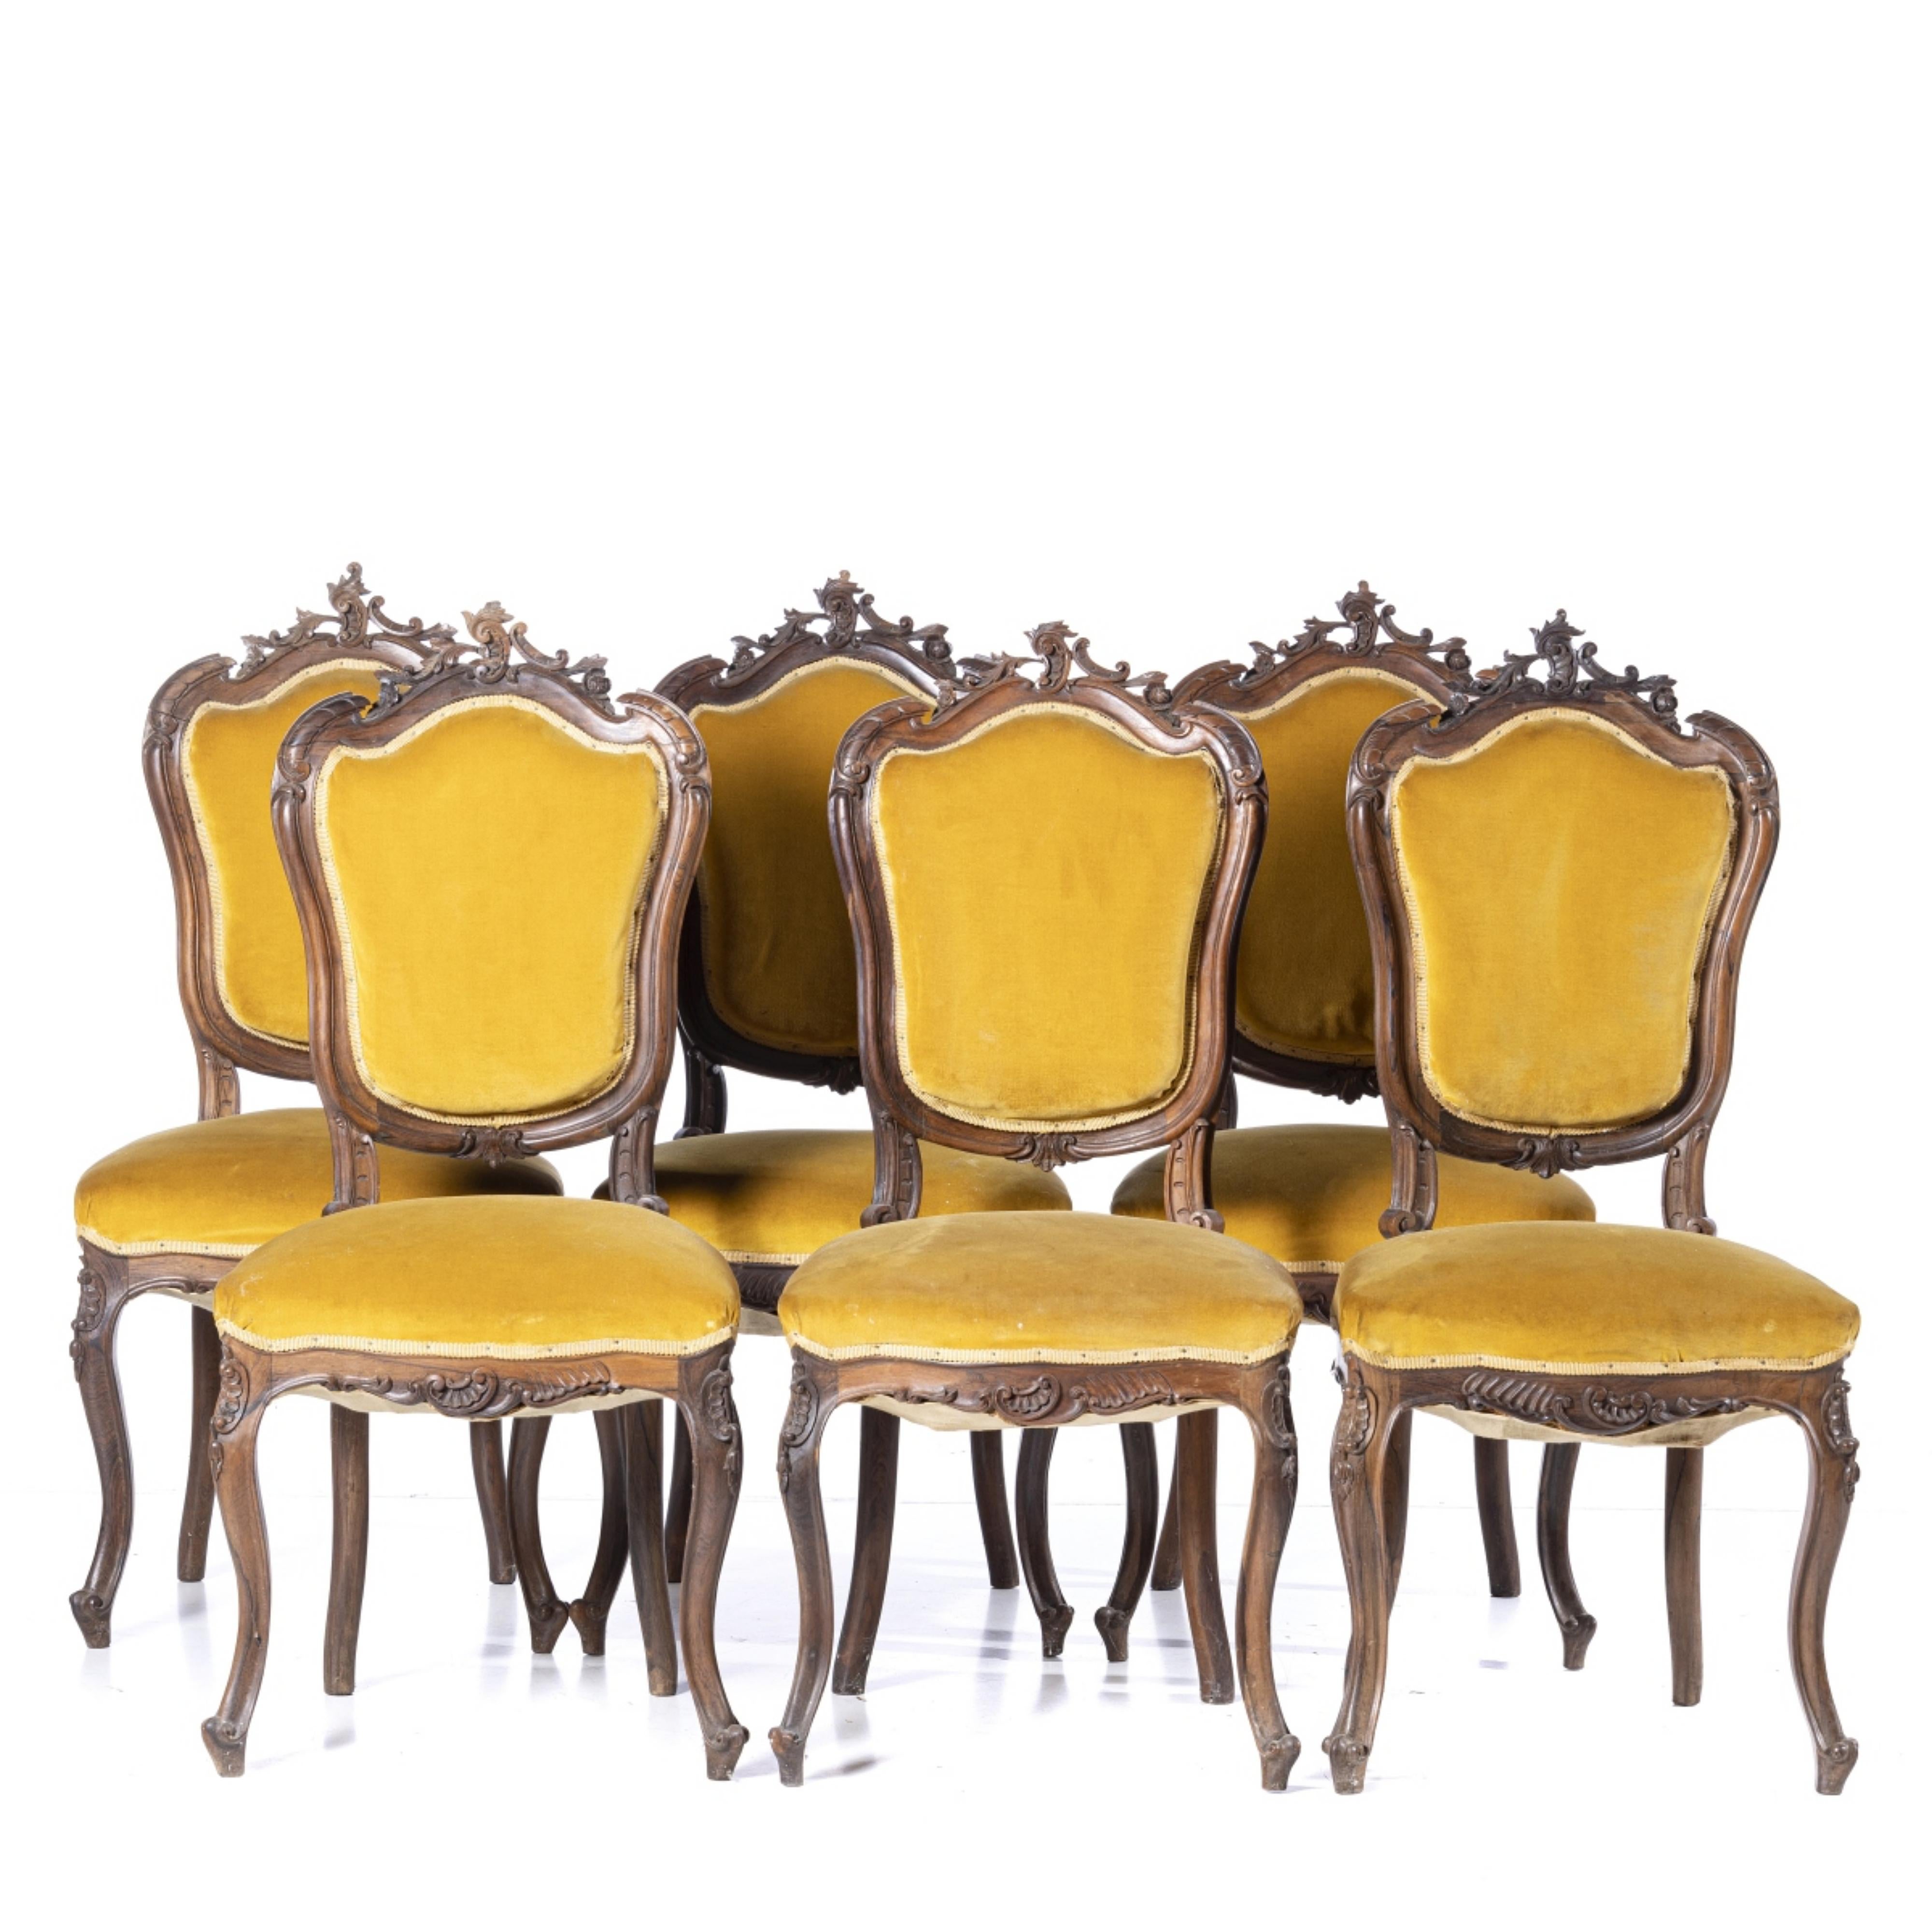 Hand-Crafted SET OF SIX LUIS XVI PORTUGUESE CHAIRS 19th Century For Sale